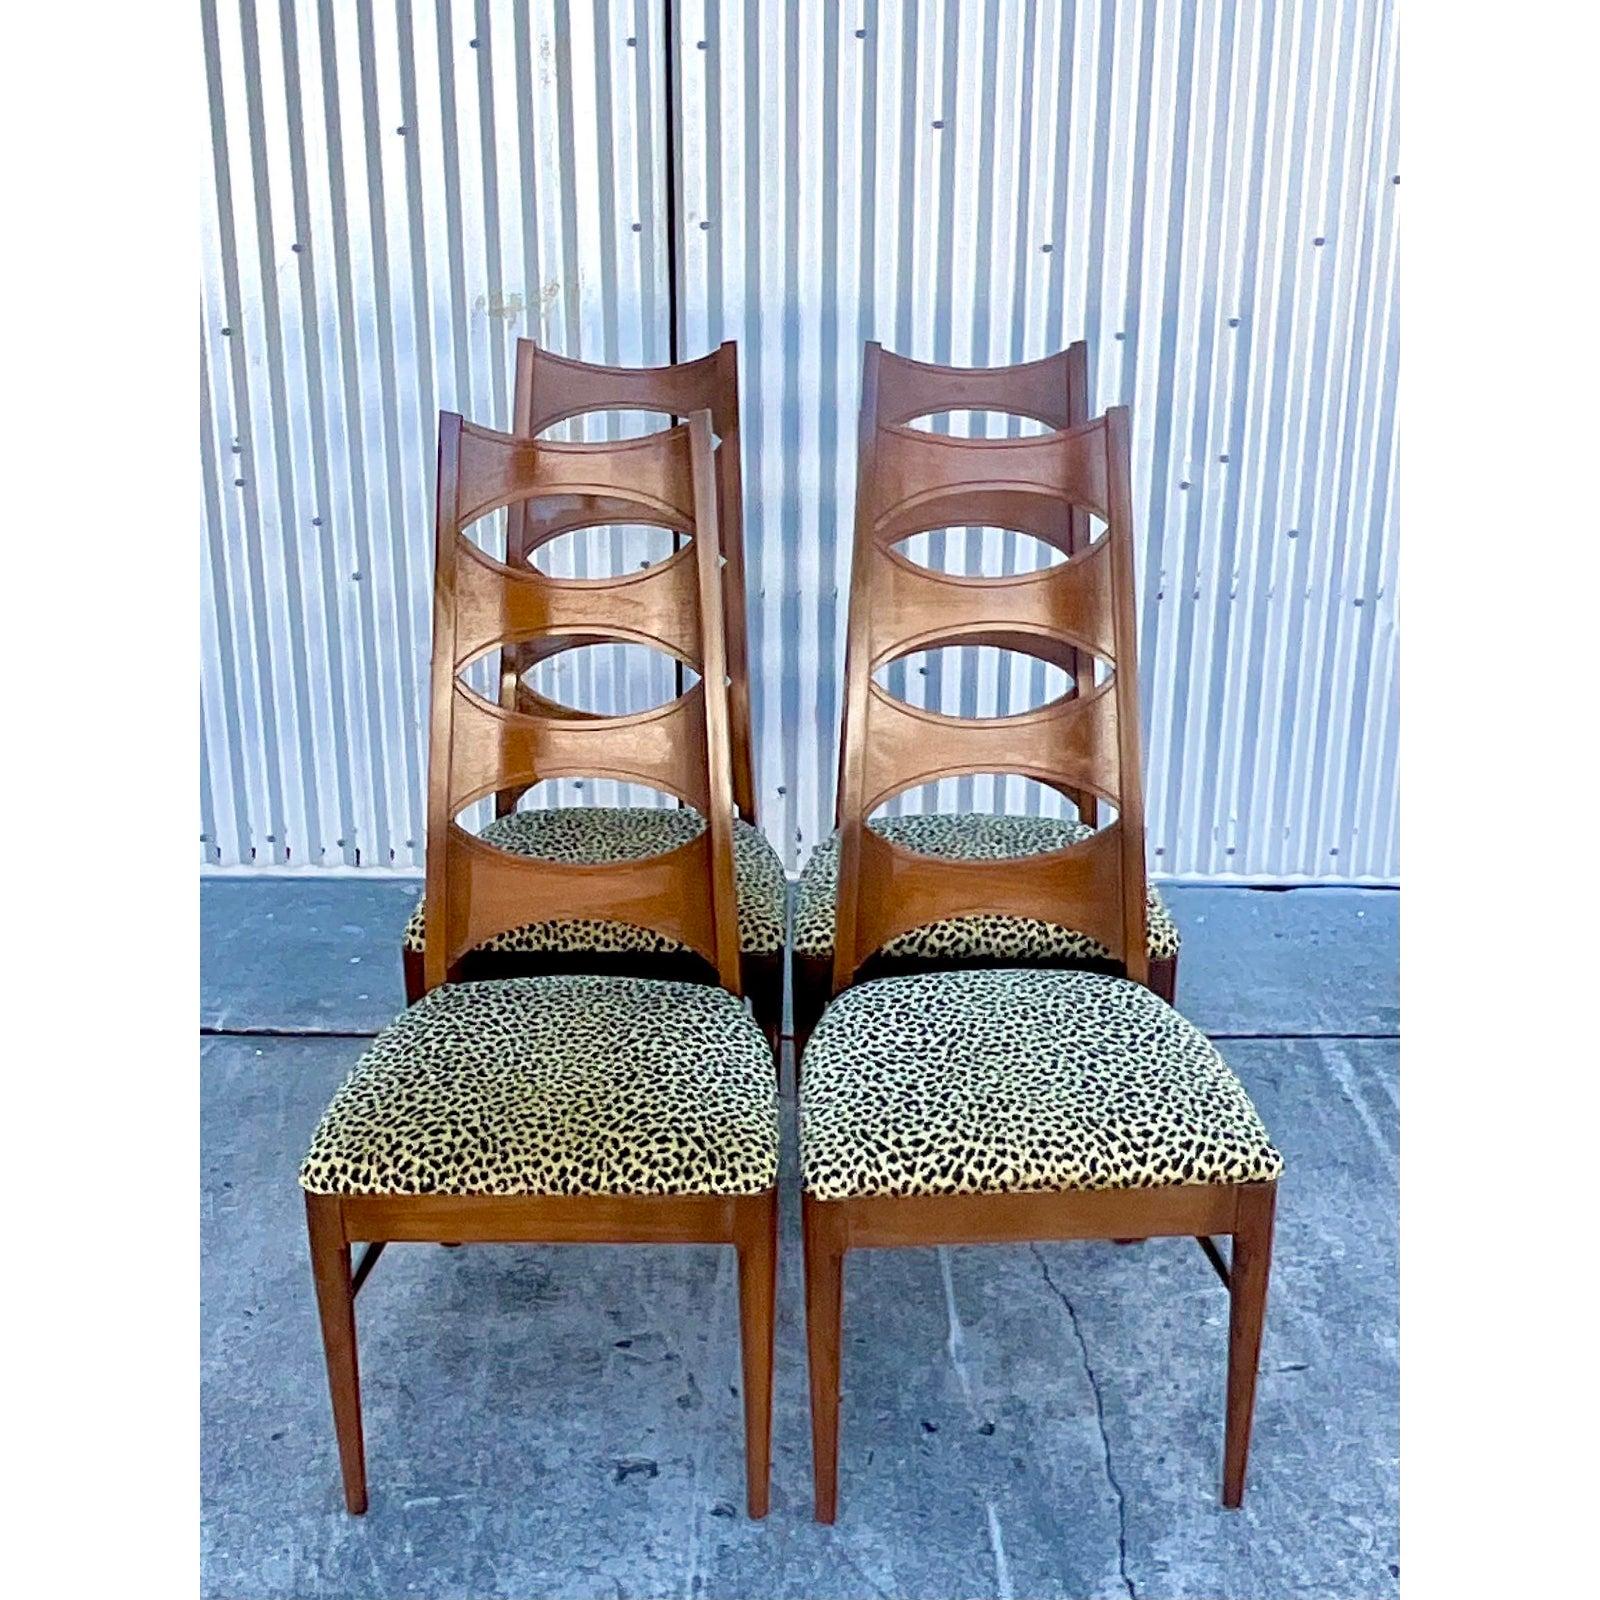 20th Century Midcentury Kent Coffey Perspecta “Cats Eye” Dining Chairs, Set of 4